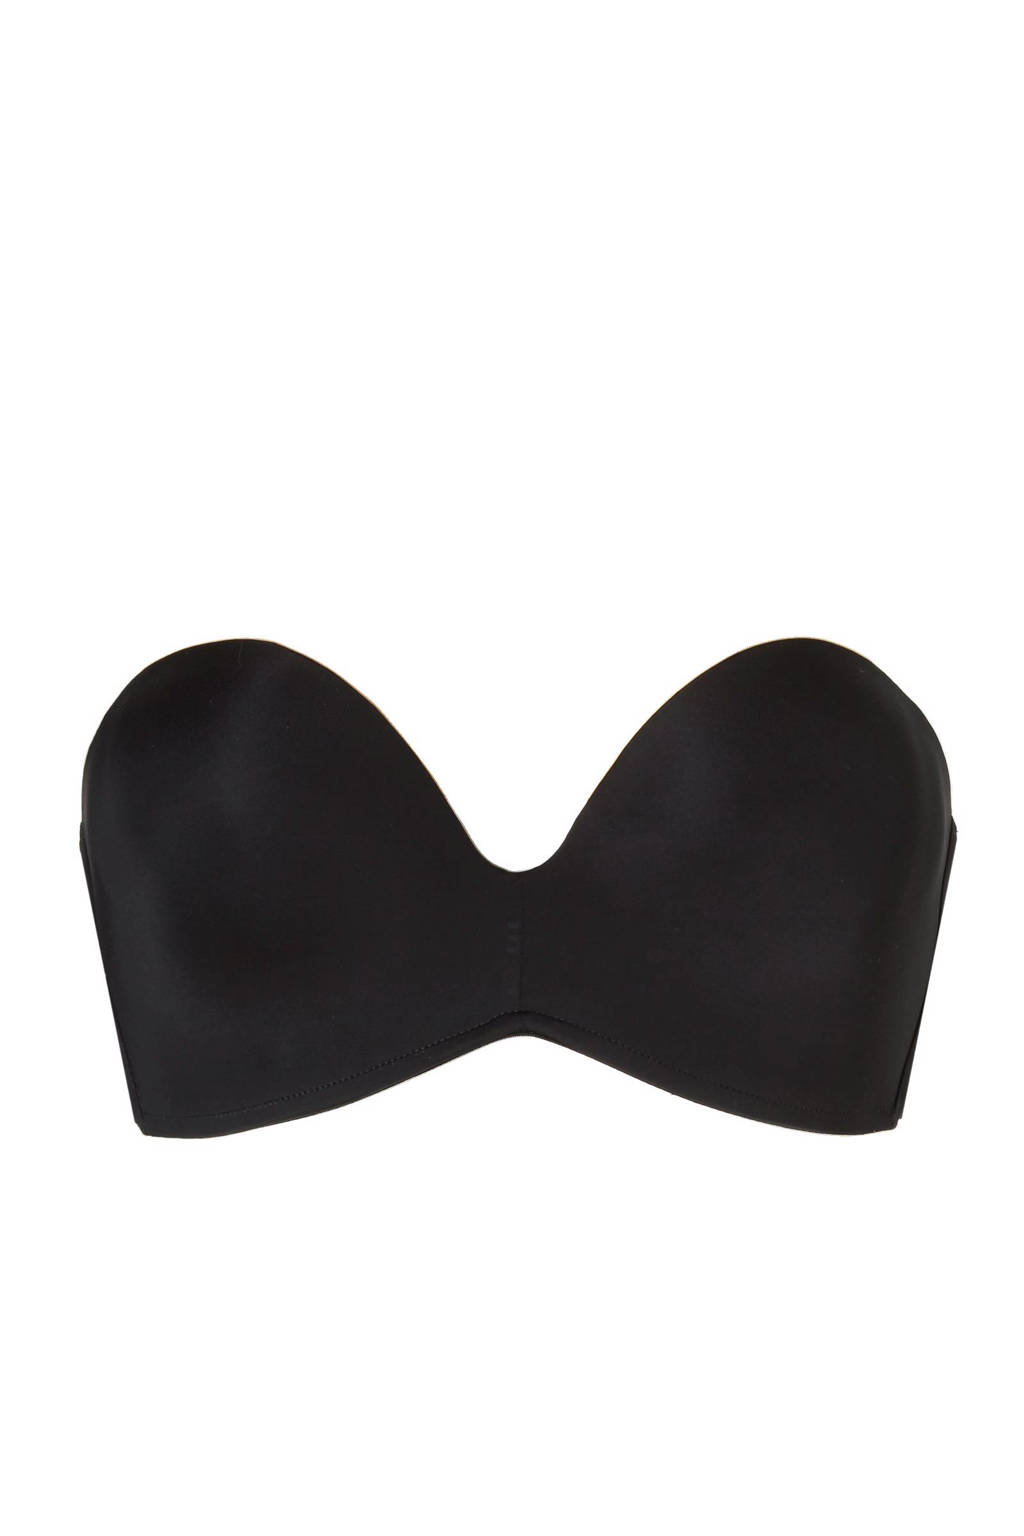 Strapless by Pushup 